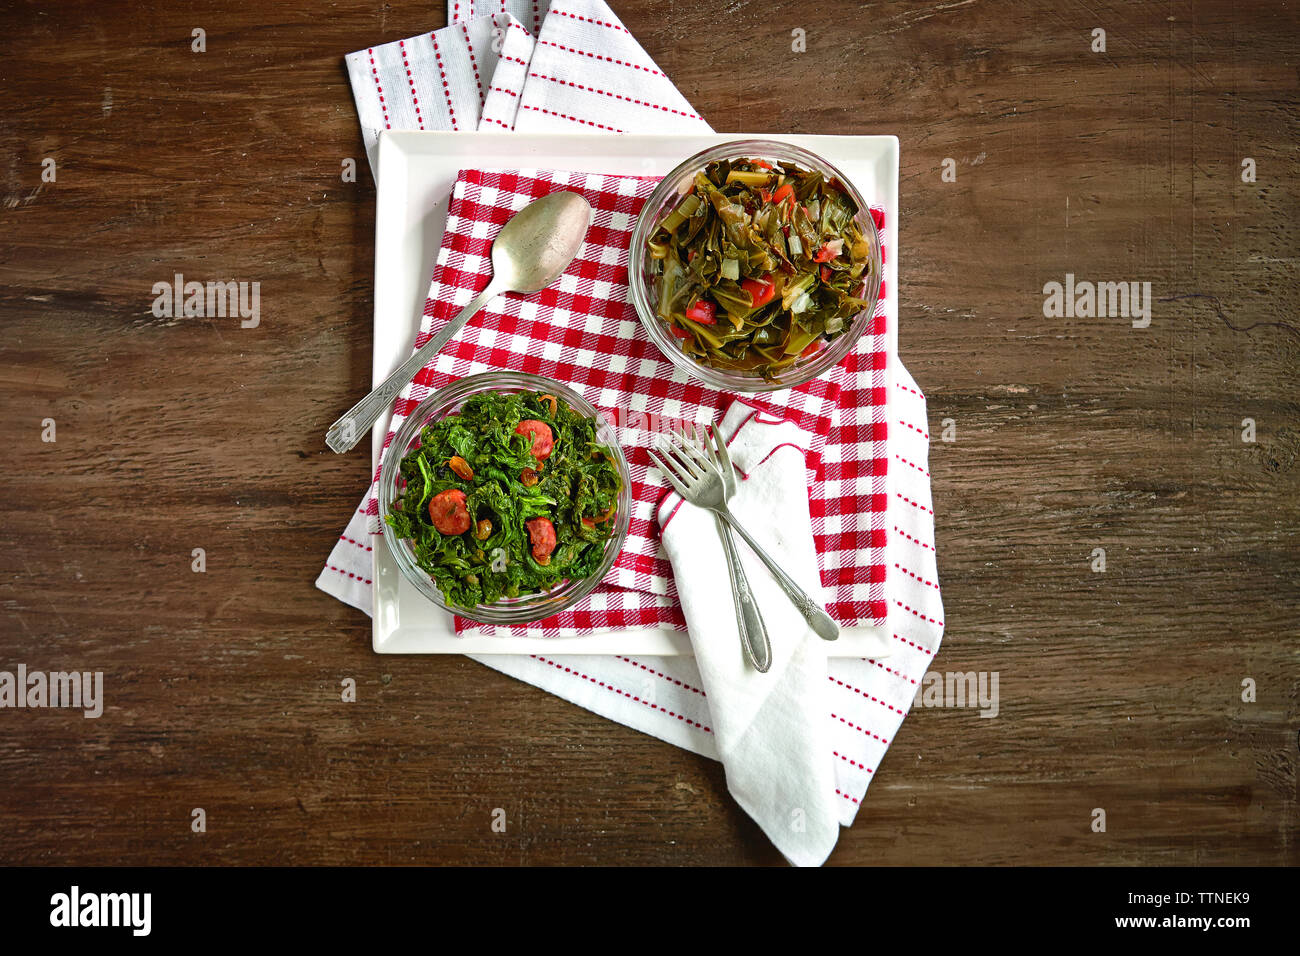 High angle view of cooked food in bowls on wooden table Stock Photo